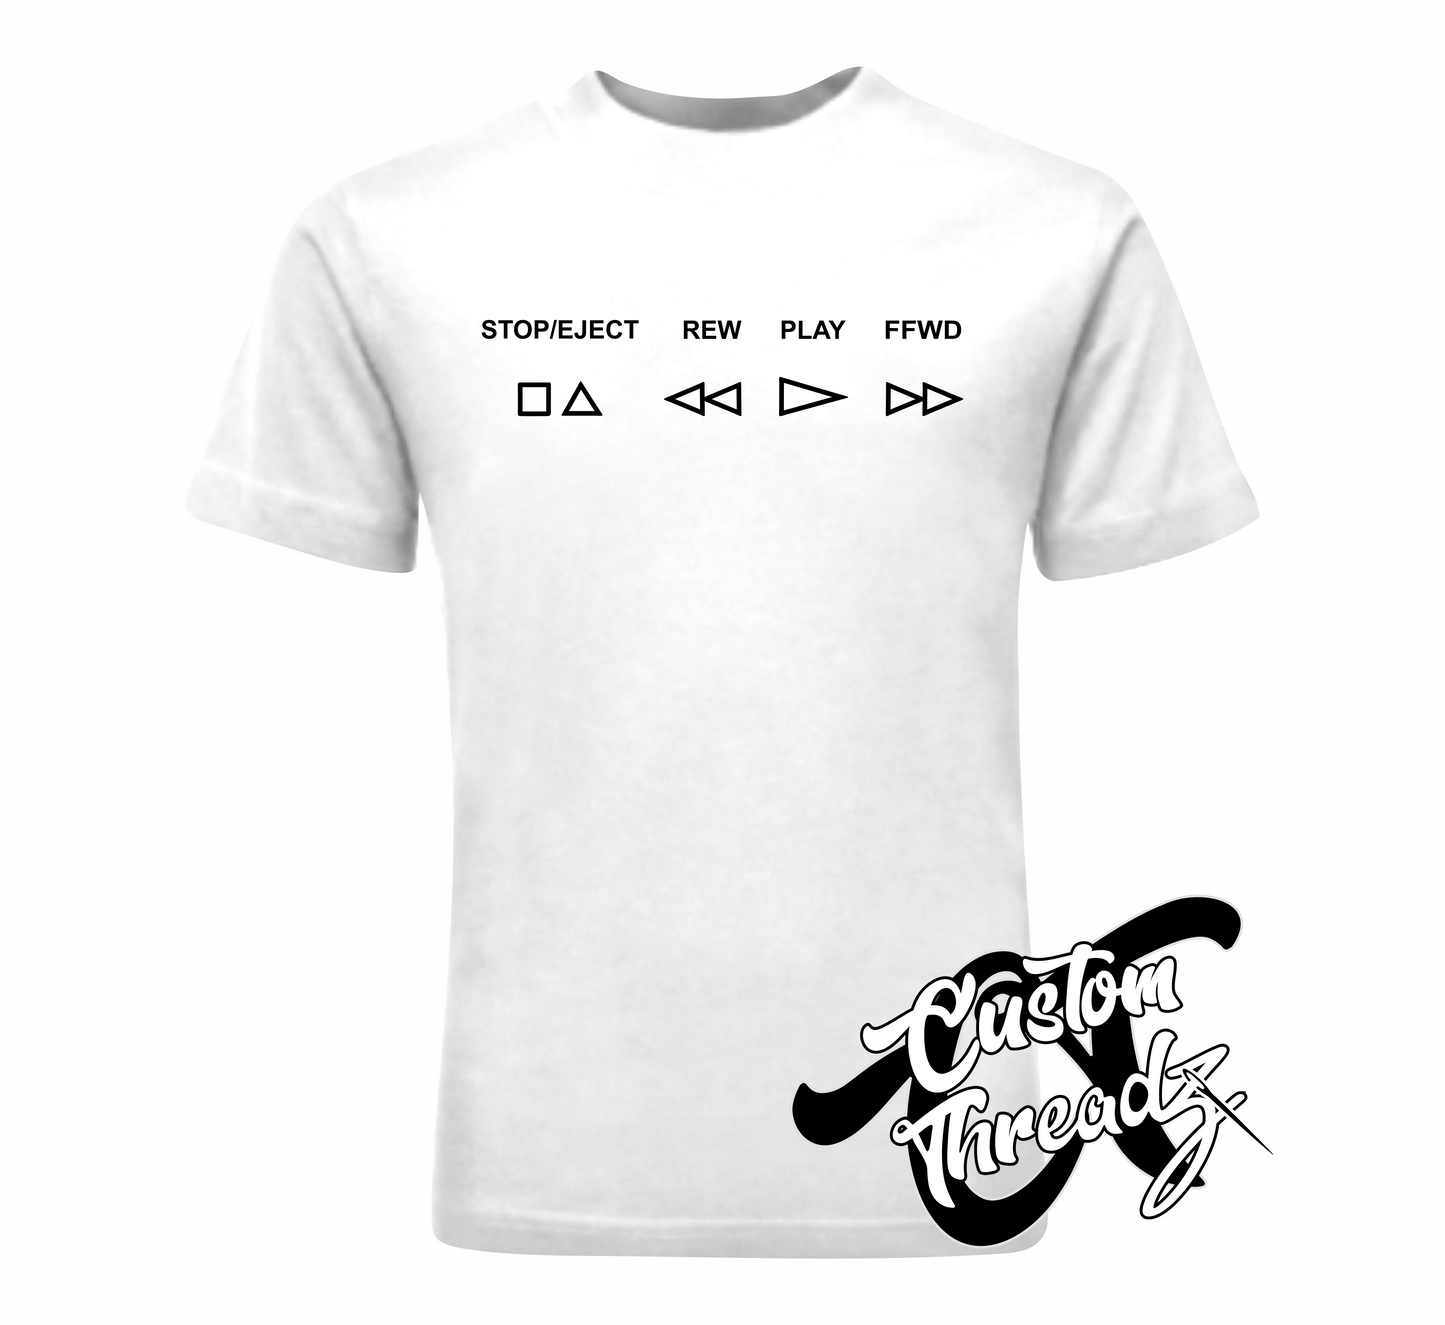 white tee with VCR buttons stop/eject rew play ffwd DTG printed design